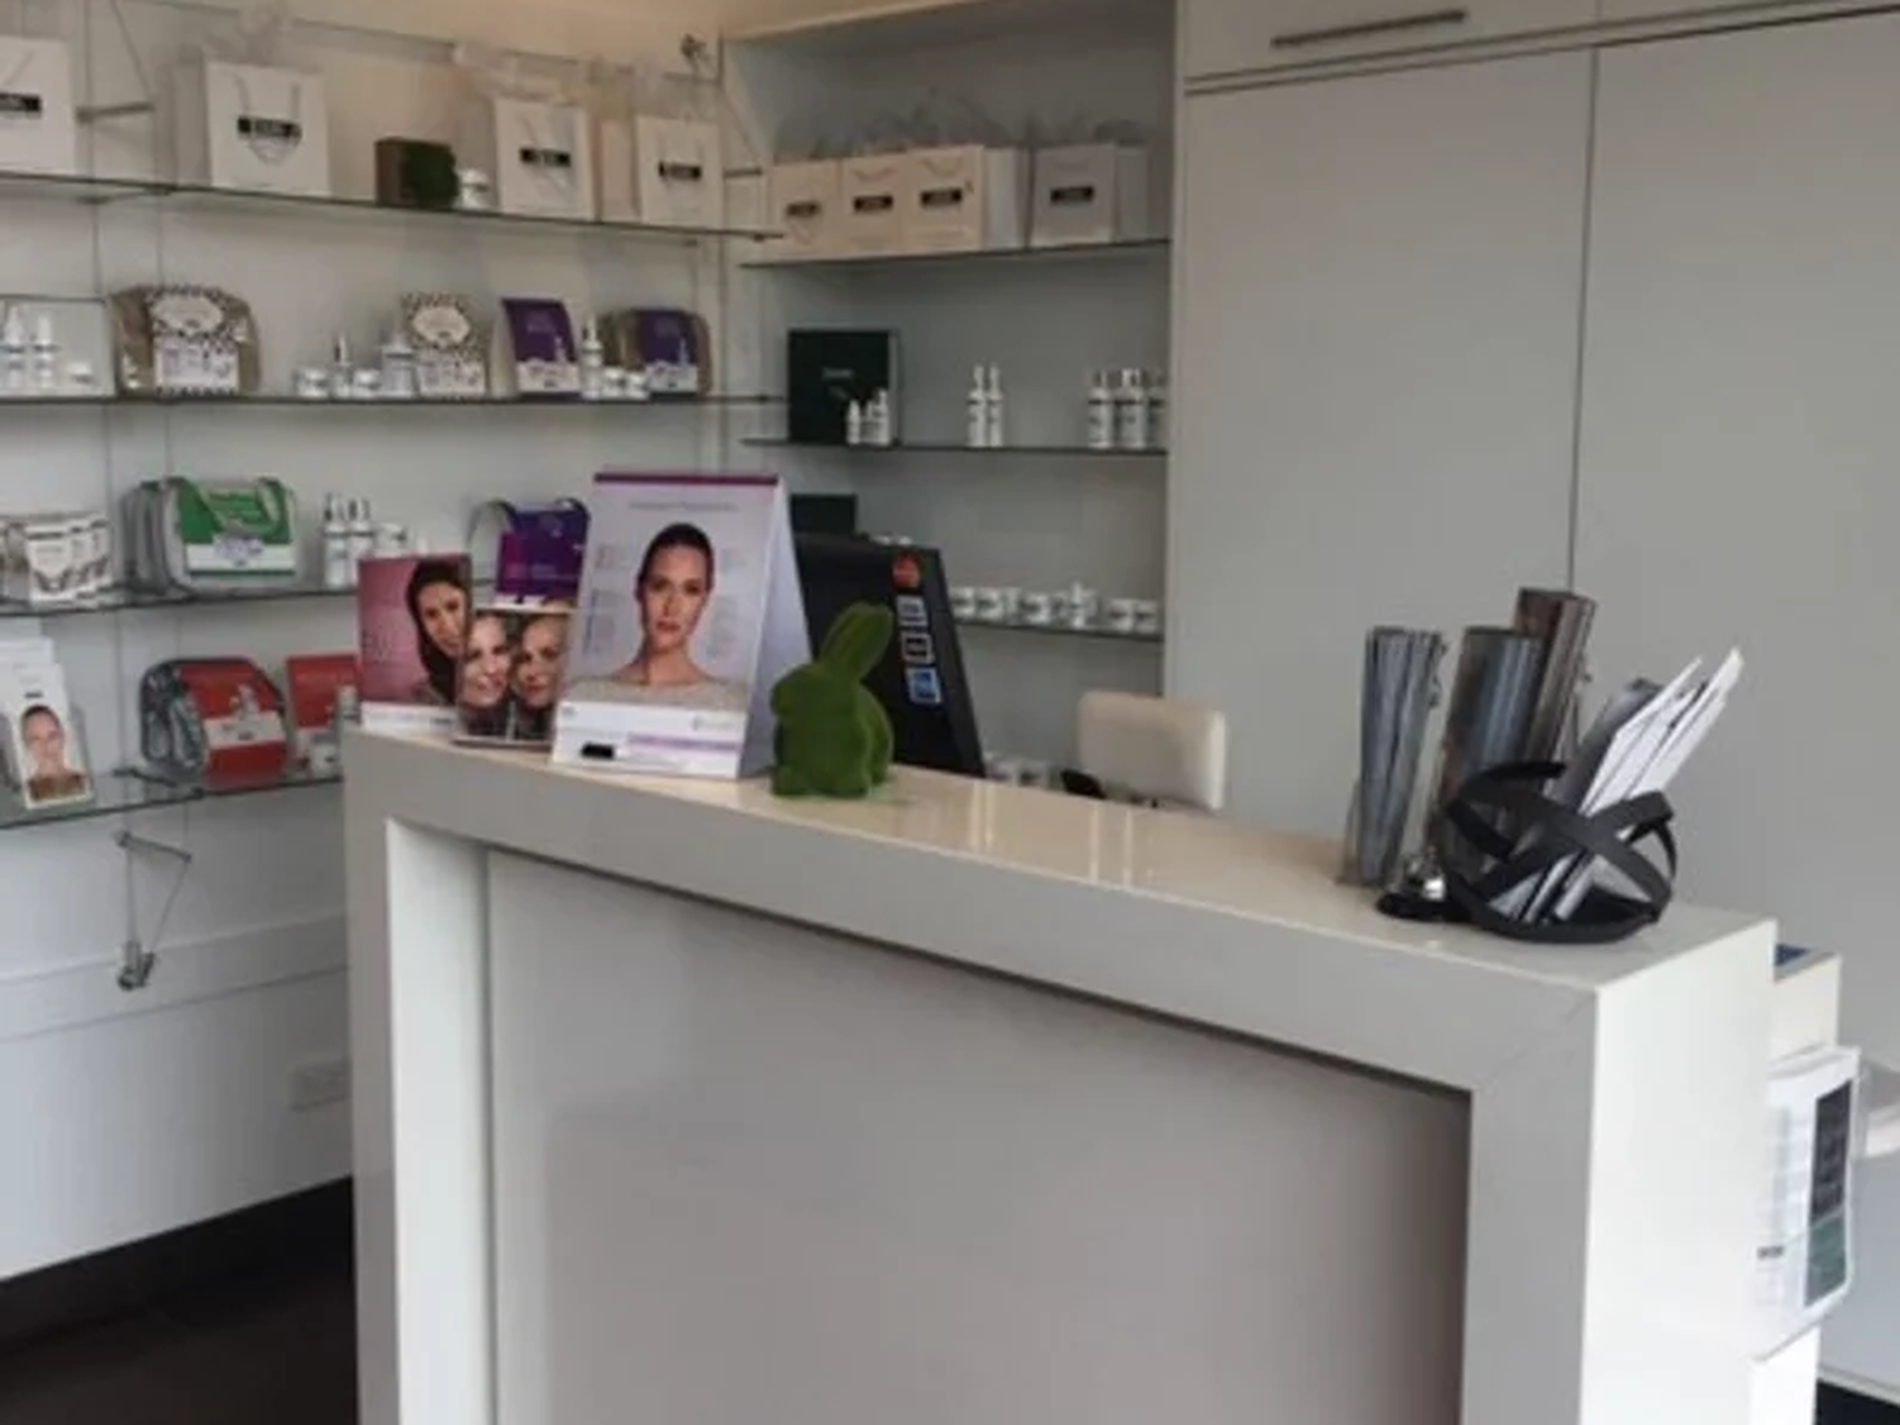 SOLD - Beauty Salon and Skin Laser Therapy Business for Sale Doncaster
